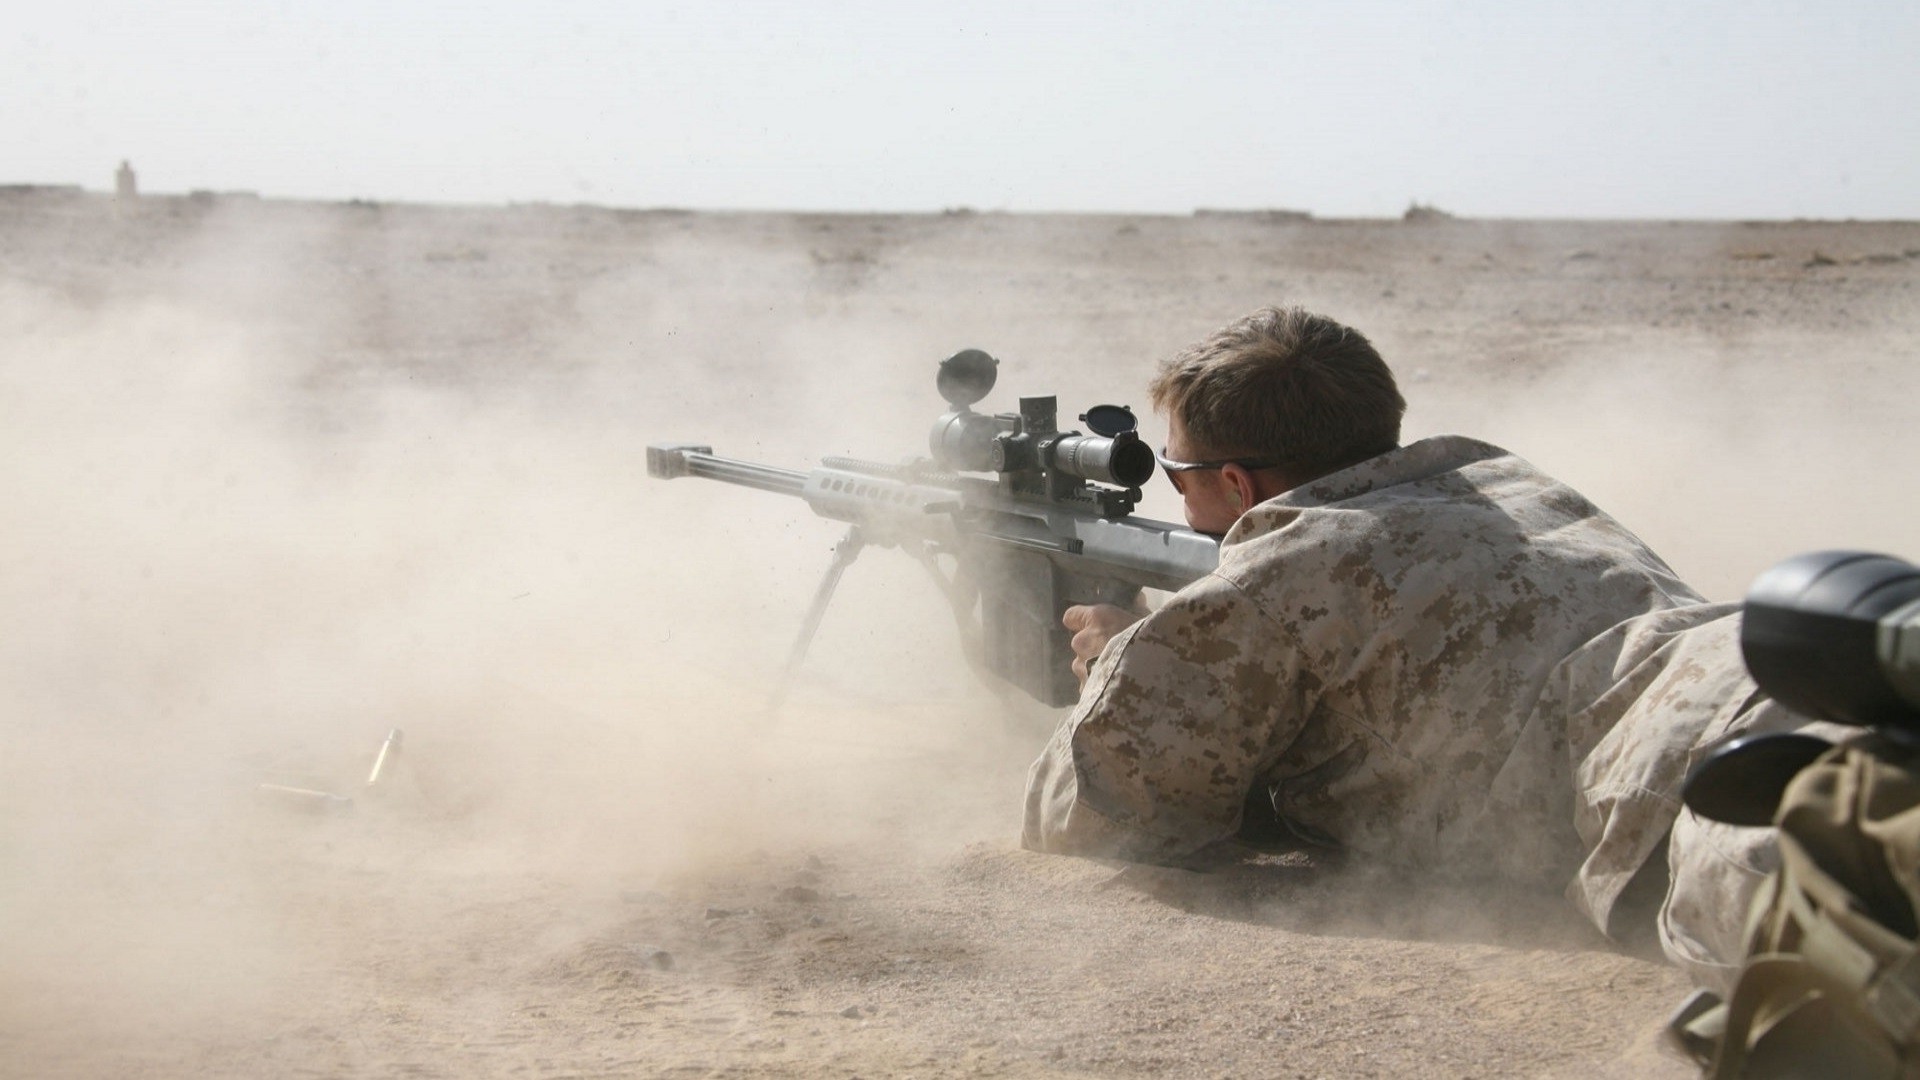 People 1920x1080 sniper rifle soldier desert Barrett .50 Cal military weapon aiming